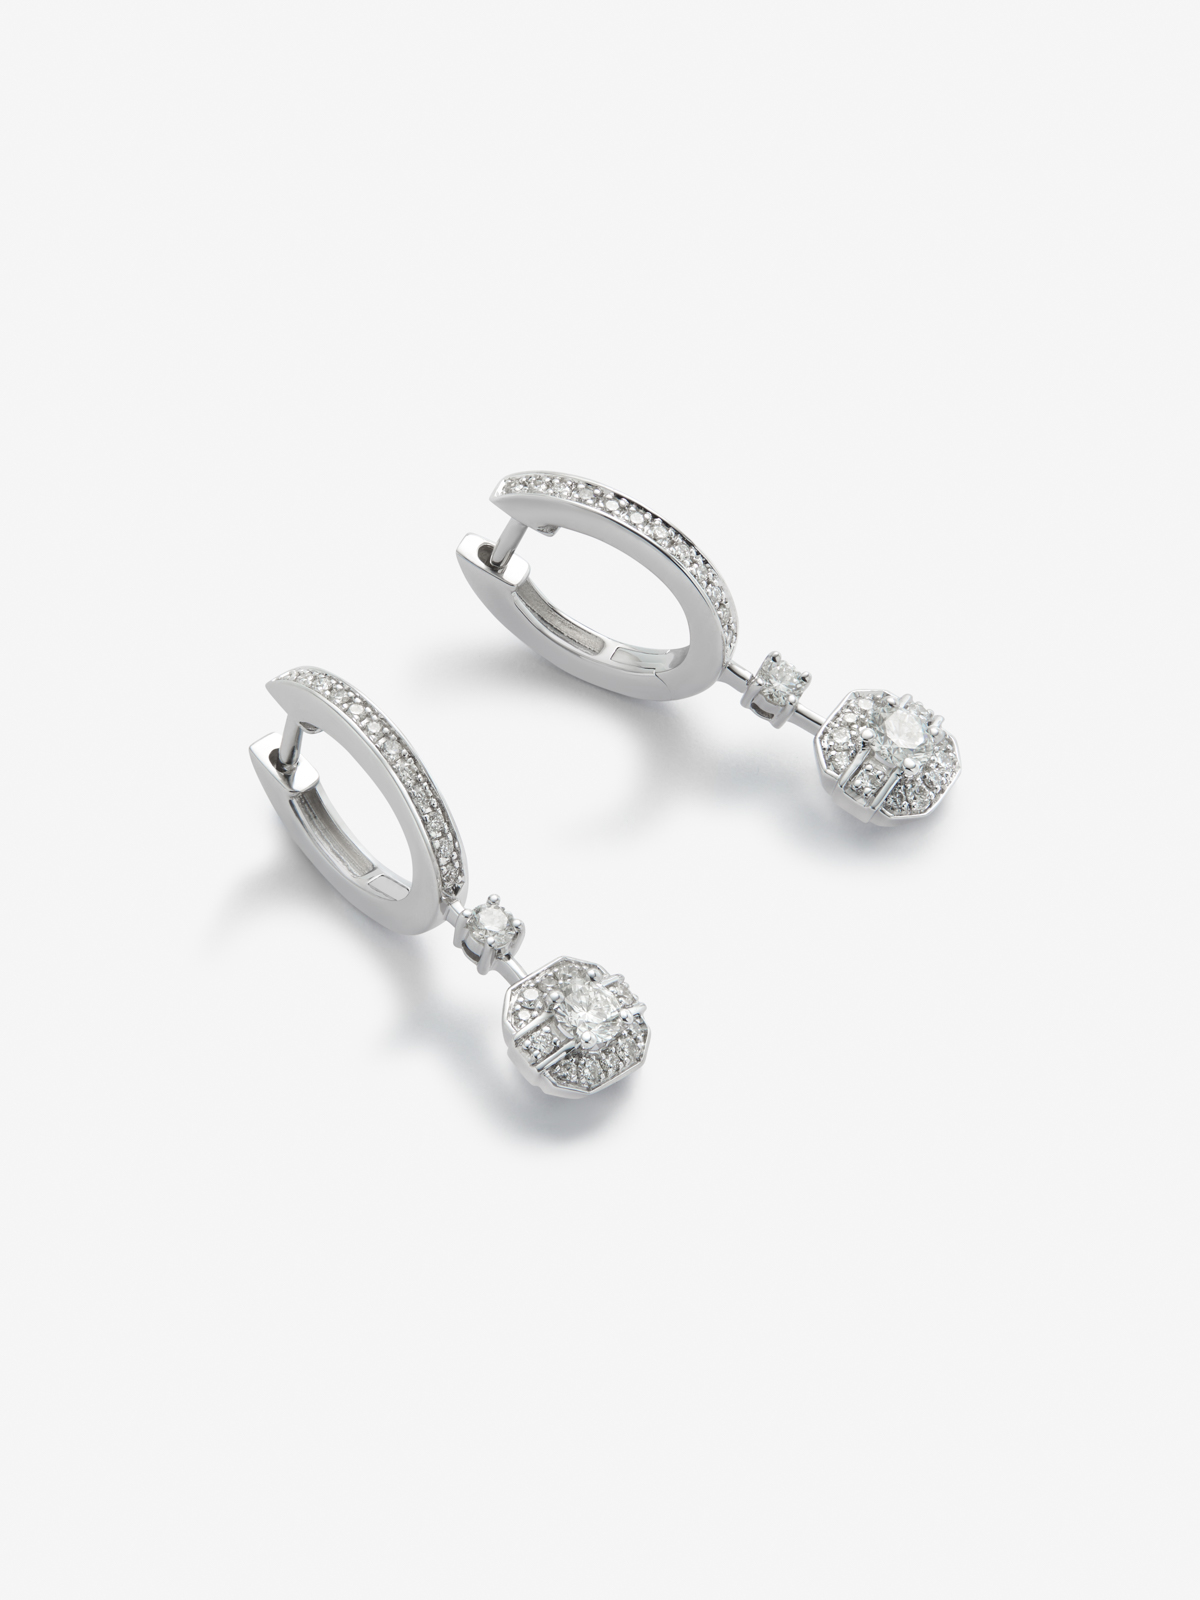 18K white gold earrings with 52 brilliant-cut diamonds with a total of 0.45 cts